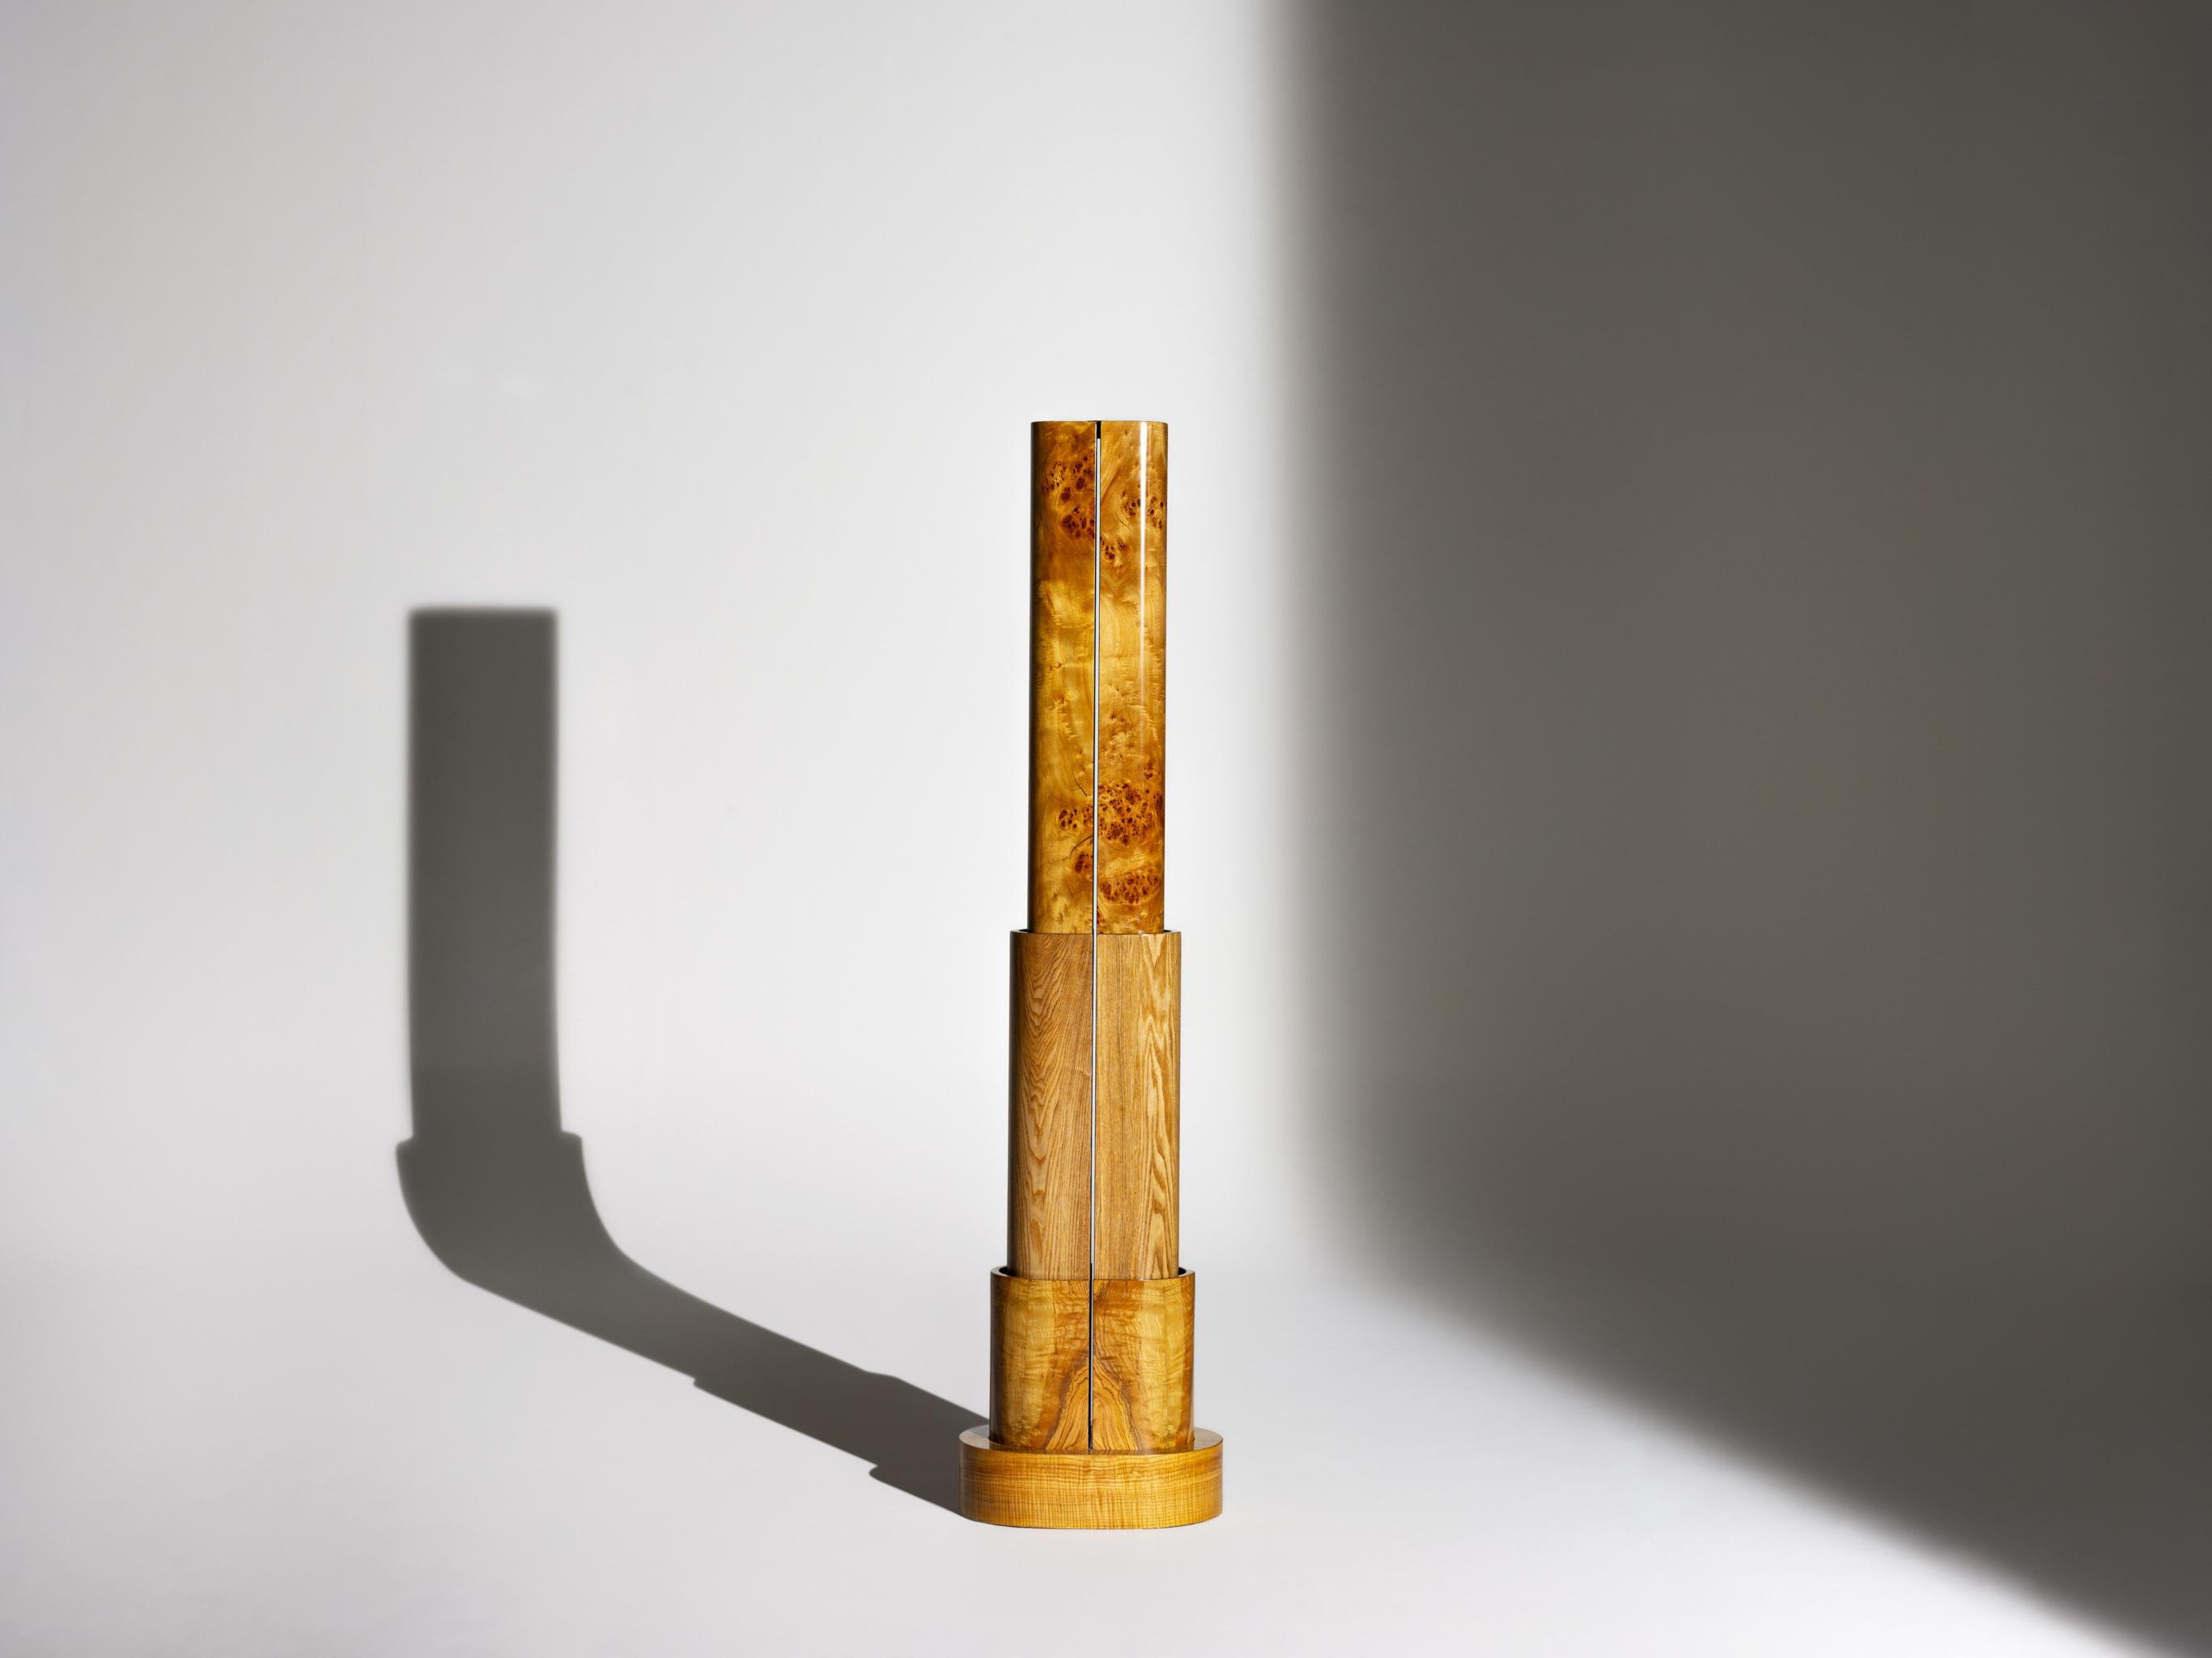 Lamp structure in mdf finished with wood veneer and resin

Andrea Vargas Dieppa emerges as a figure of complexity and daring delicacy, possessing an unrivaled intuitive energy to craft her own cosmos through the body of work presented. Her creations